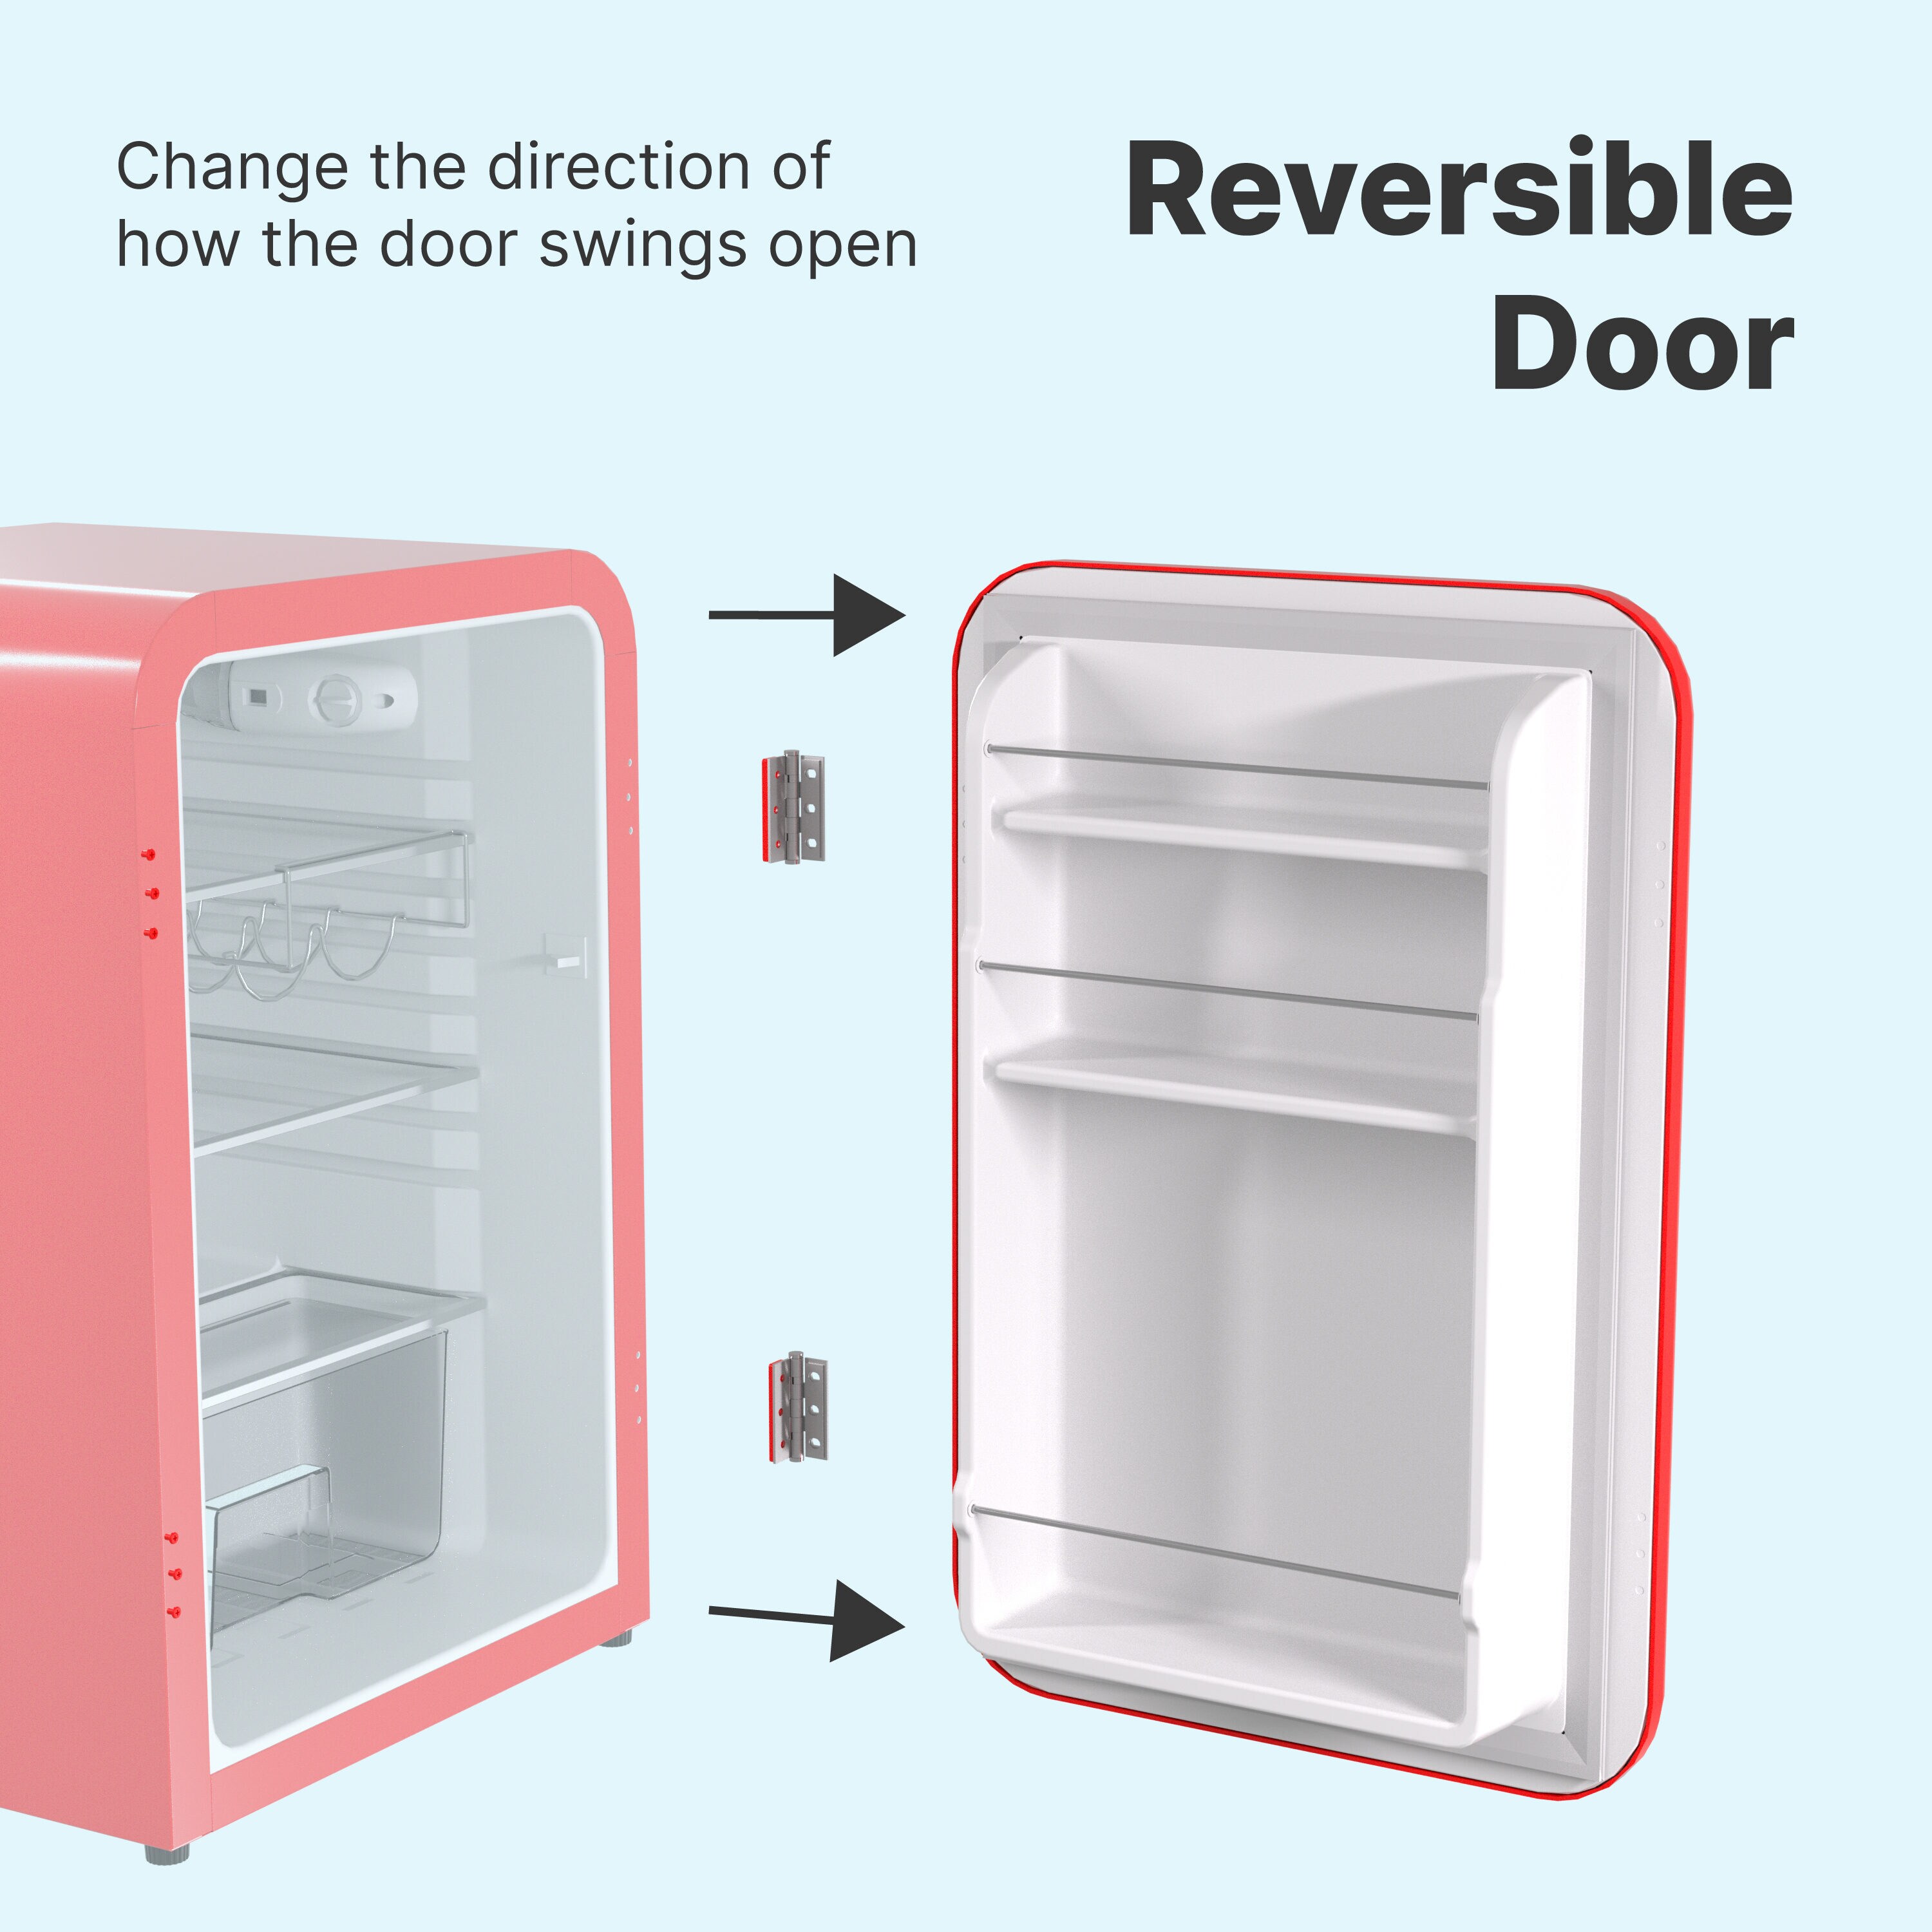 Mini fridge: Find out which models you can snag at a discount before they  sell out